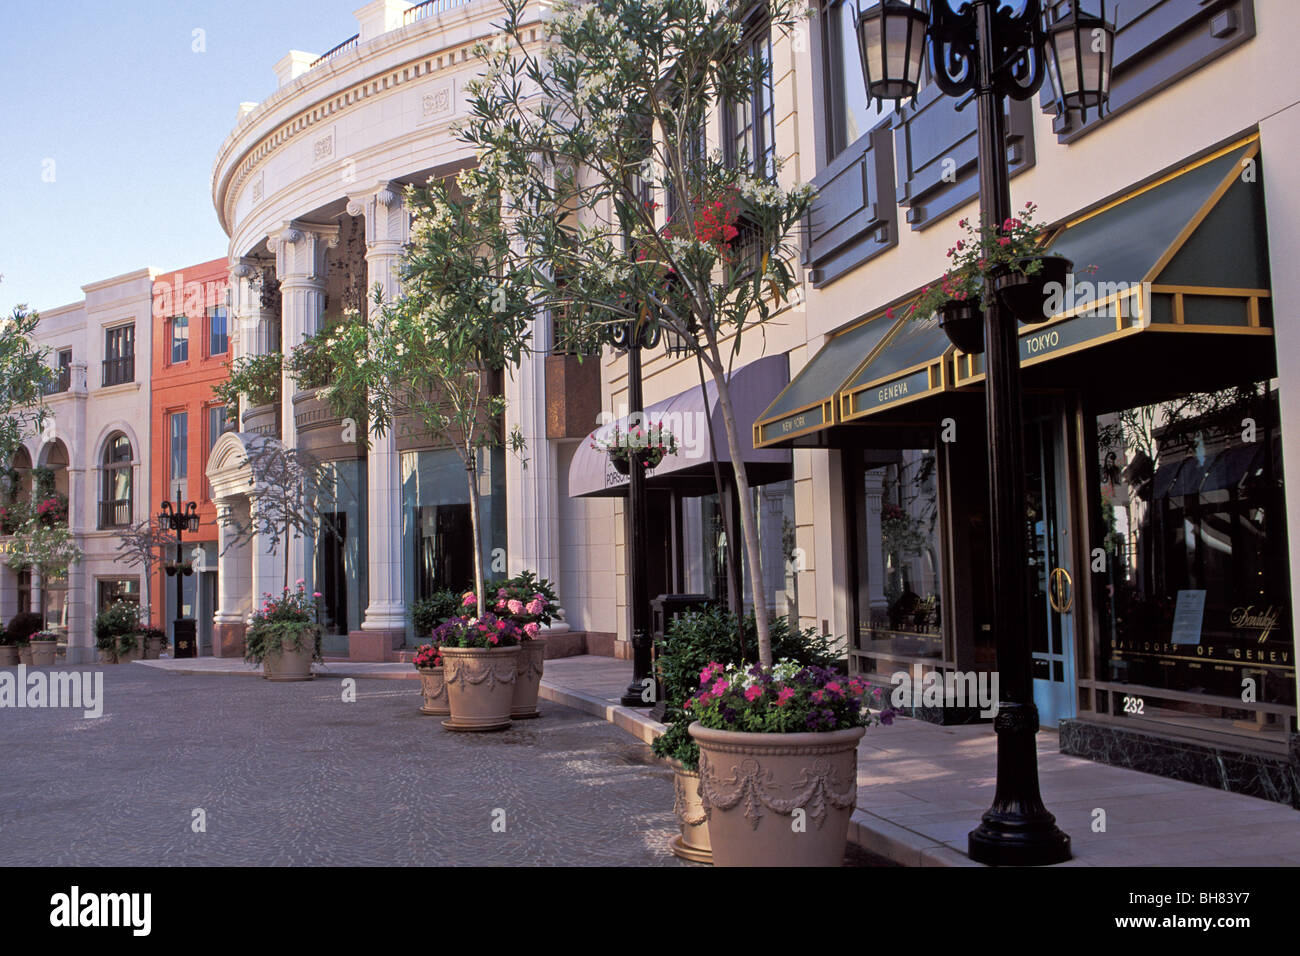 Rodeo Drive Shops Stock Photos & Rodeo Drive Shops Stock Images - Alamy